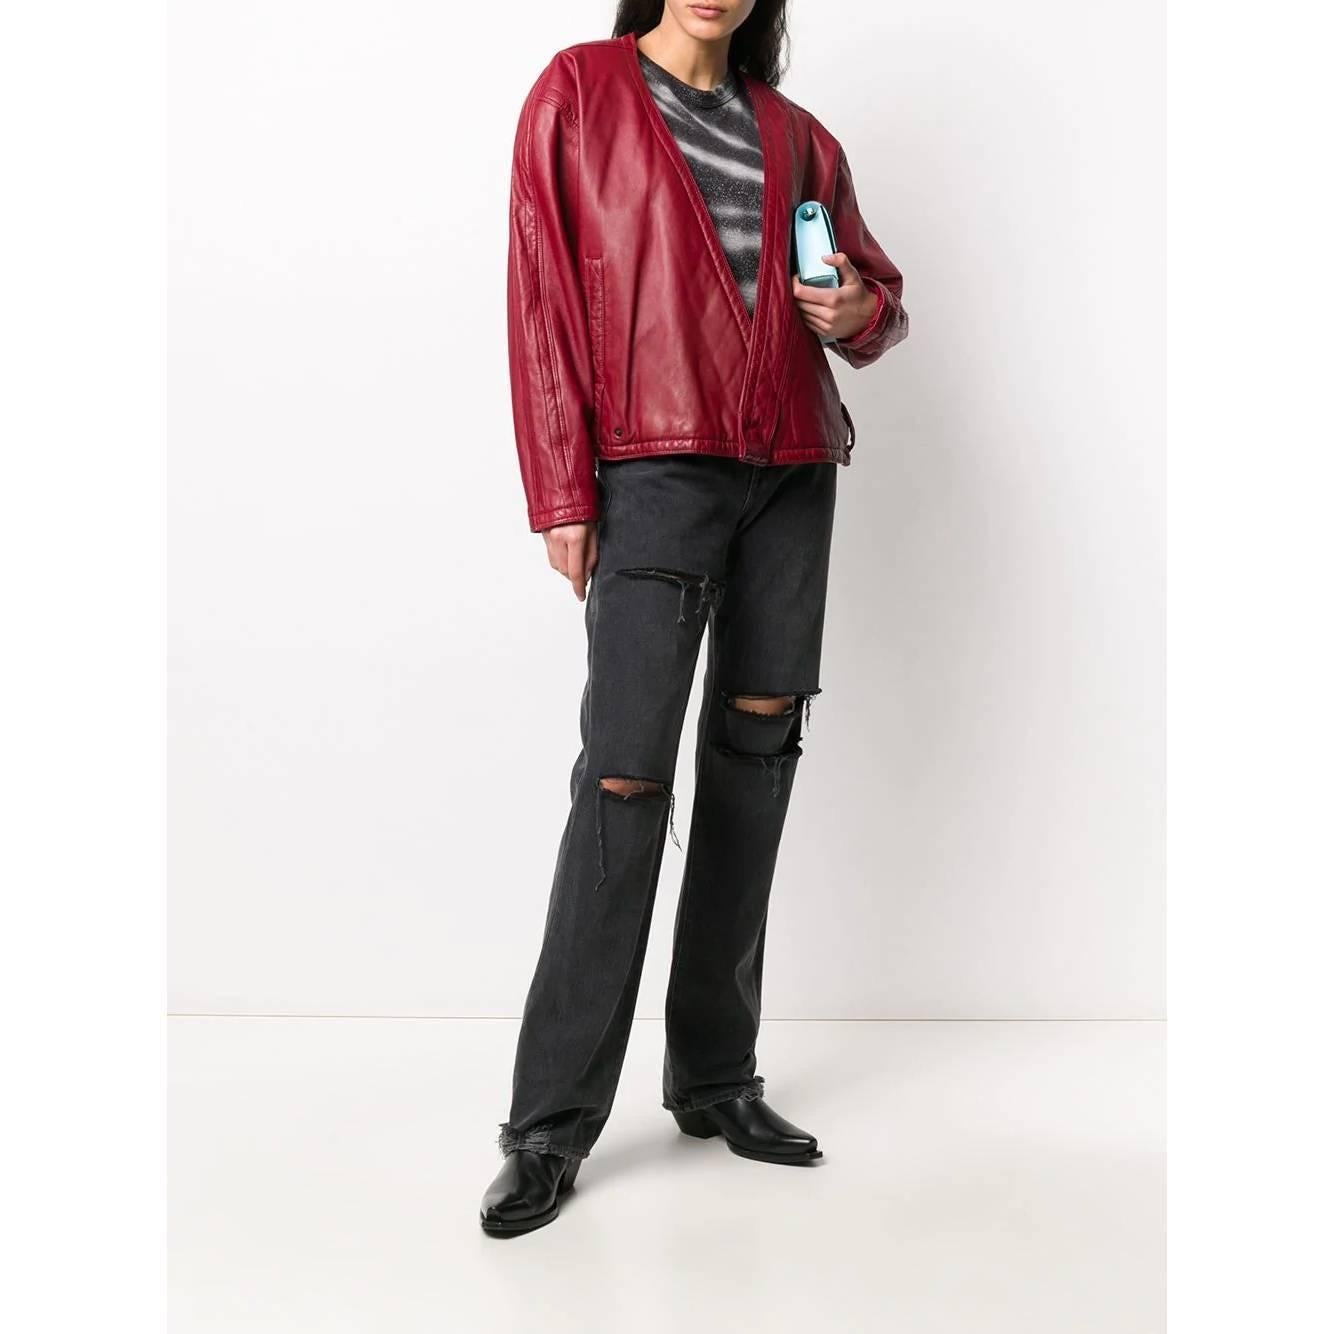 A.N.G.E.L.O. Vintage - ITALY

A.N.G.E.L.O. Vintage Cult burgundy leather jacket. V-neck model and crossover closure with snap buttons. Long sleeves, padded shoulder, welt pockets and belt loops.

The product has slight signs of wear in the leather